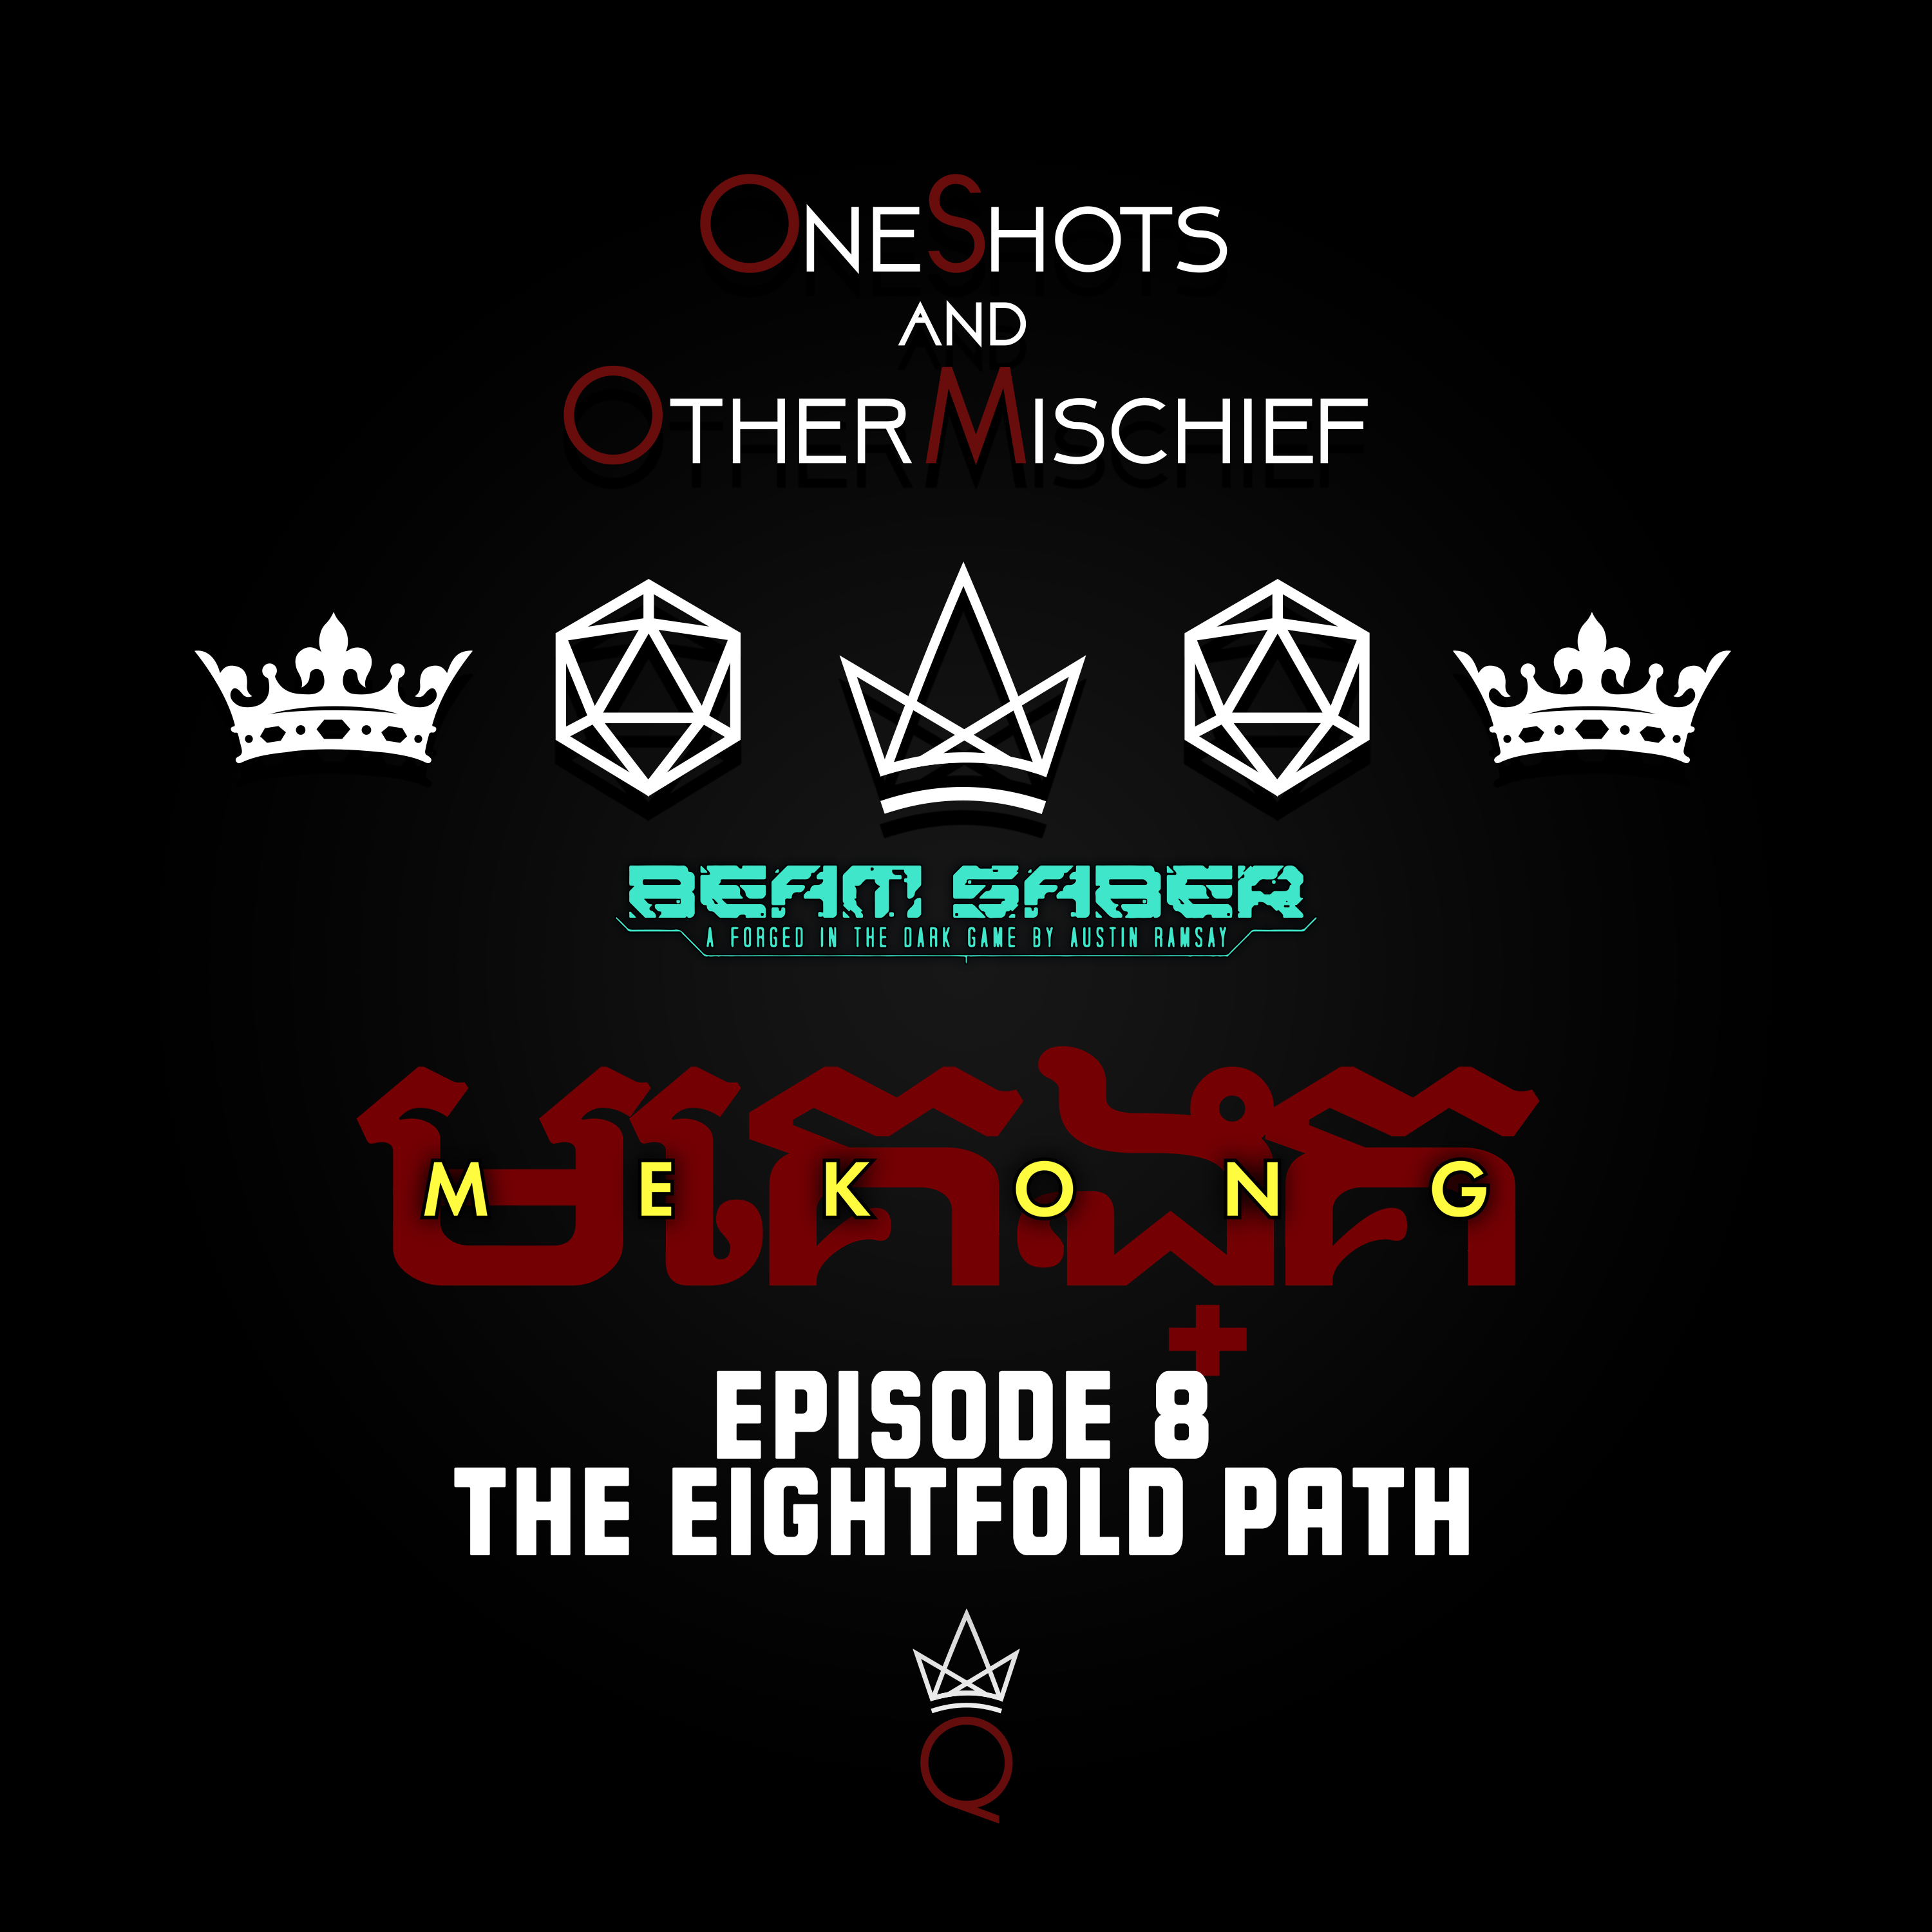 Beam Saber - MEKONG: Symphony for the Devil, Episode 8 [The Eightfold Path]